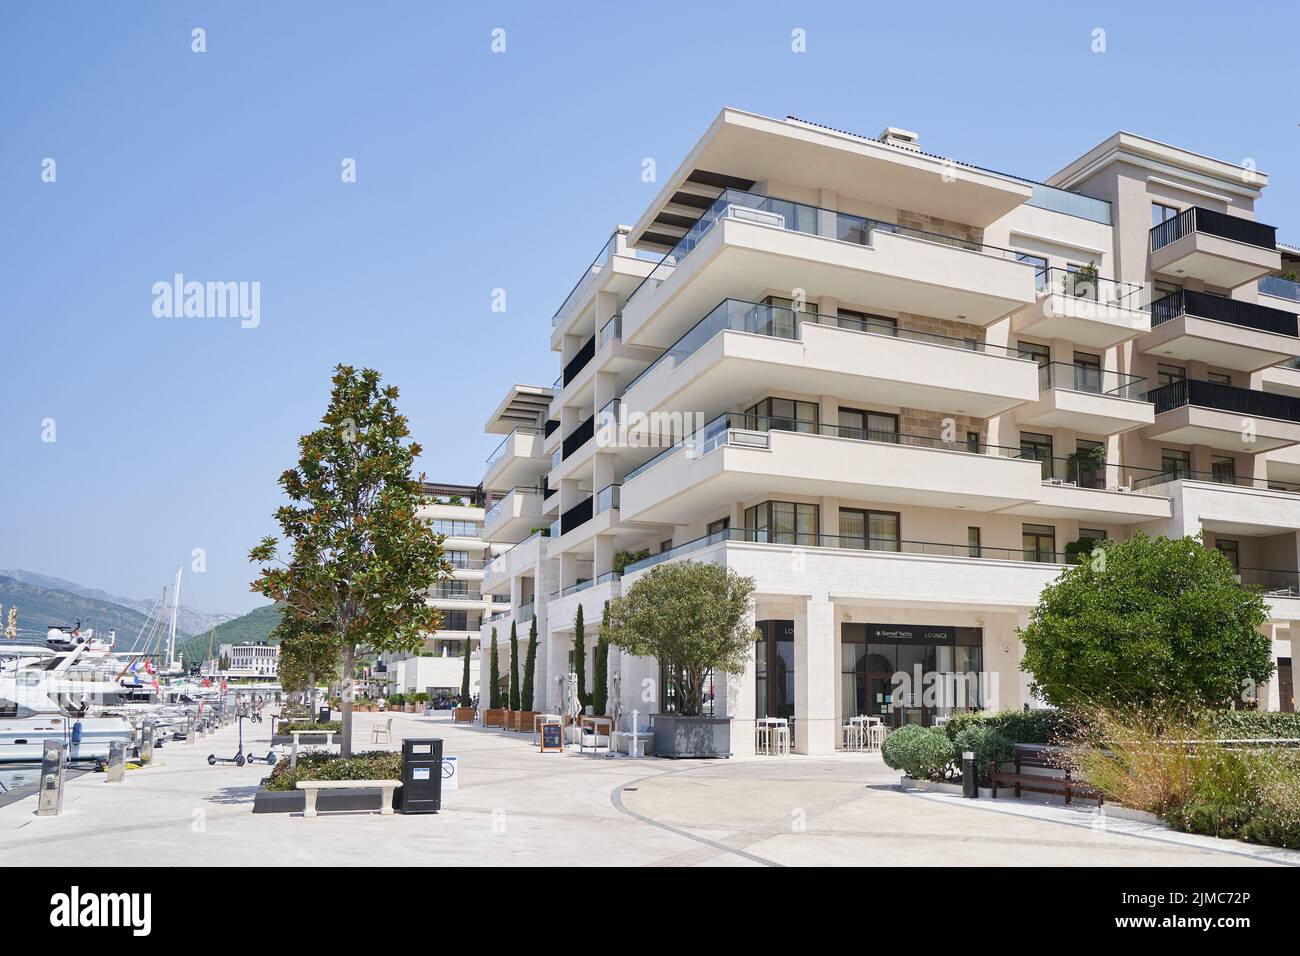 Luxurious apartment building in a resort town Stock Photo